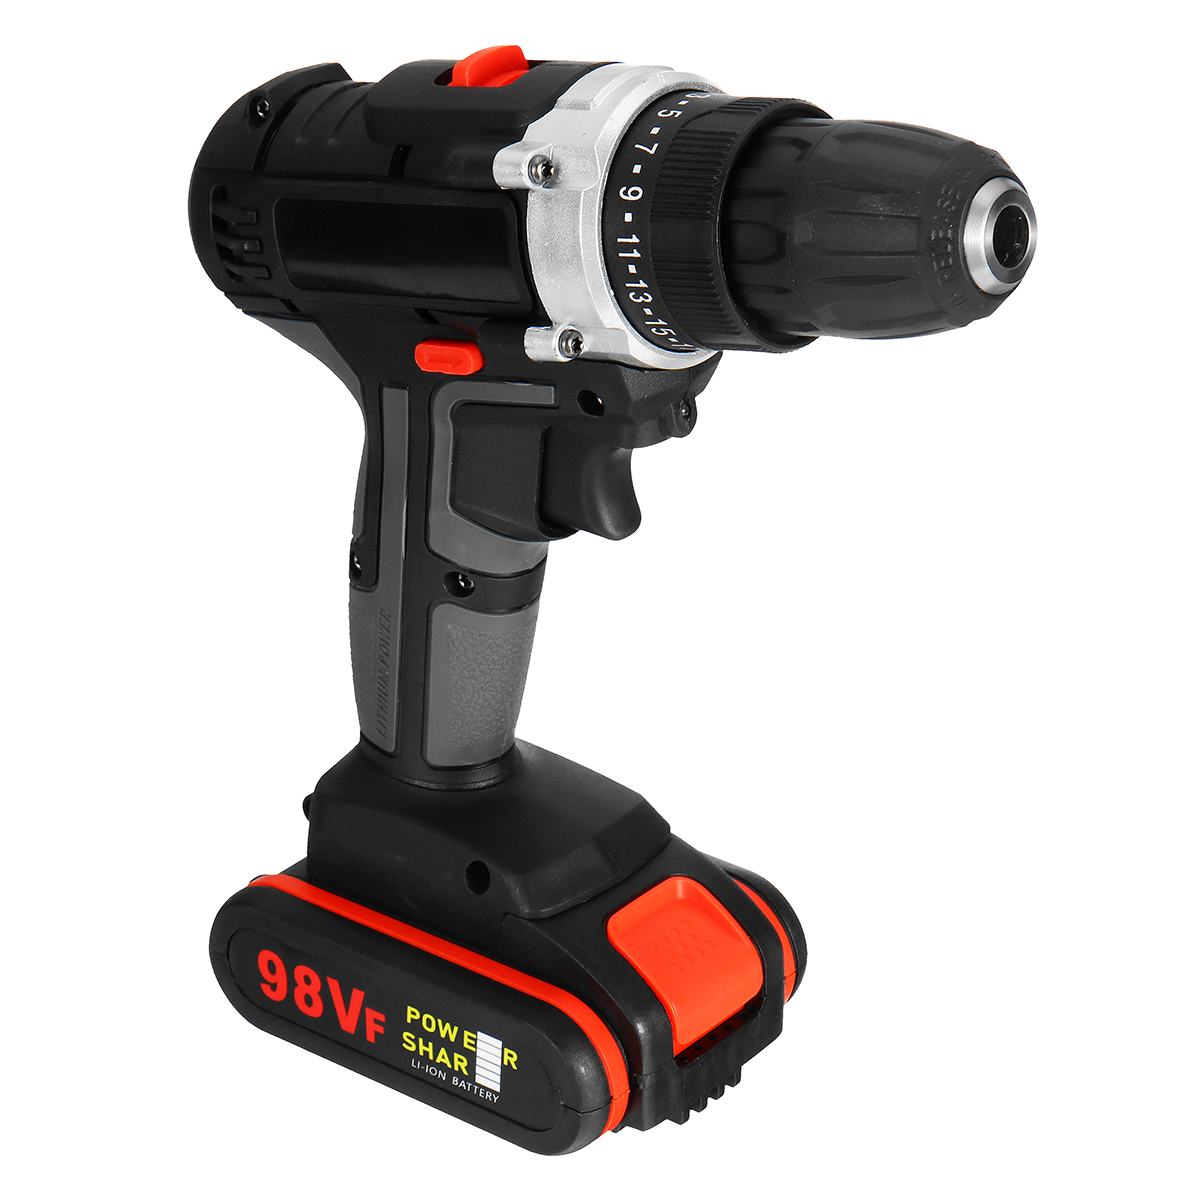 

98VF Rechargeable Electric Cordless Impact Drill Screwdriver 25+1 Torque LED